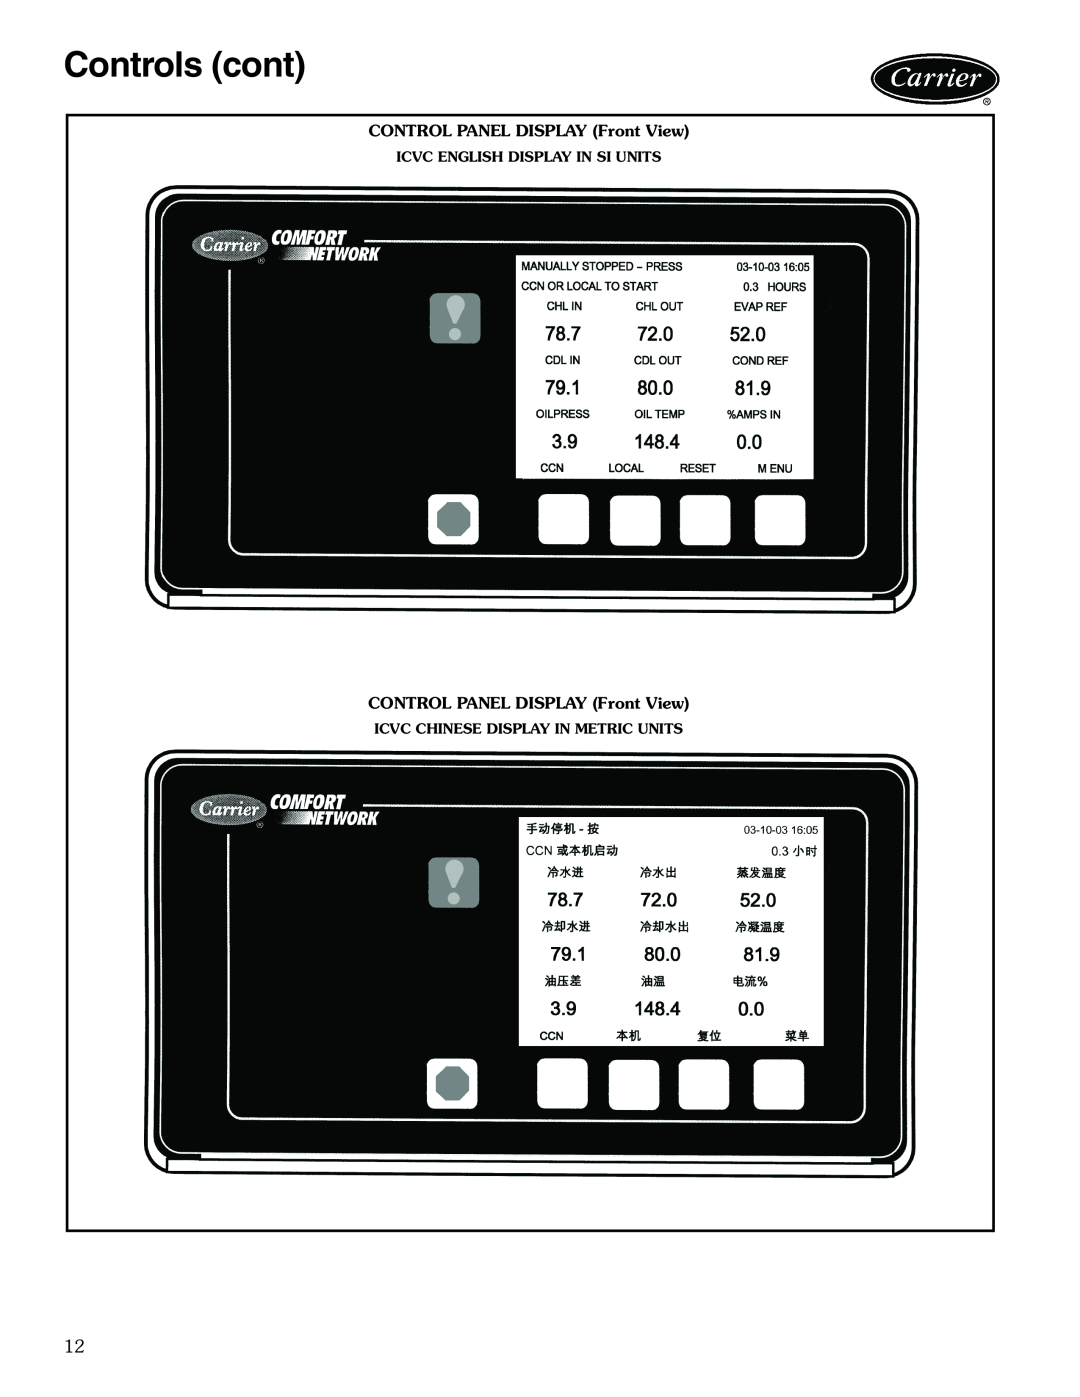 Carrier 23XRV manual Controls cont, CONTROL PANEL DISPLAY Front View, Icvc English Display In Si Units 